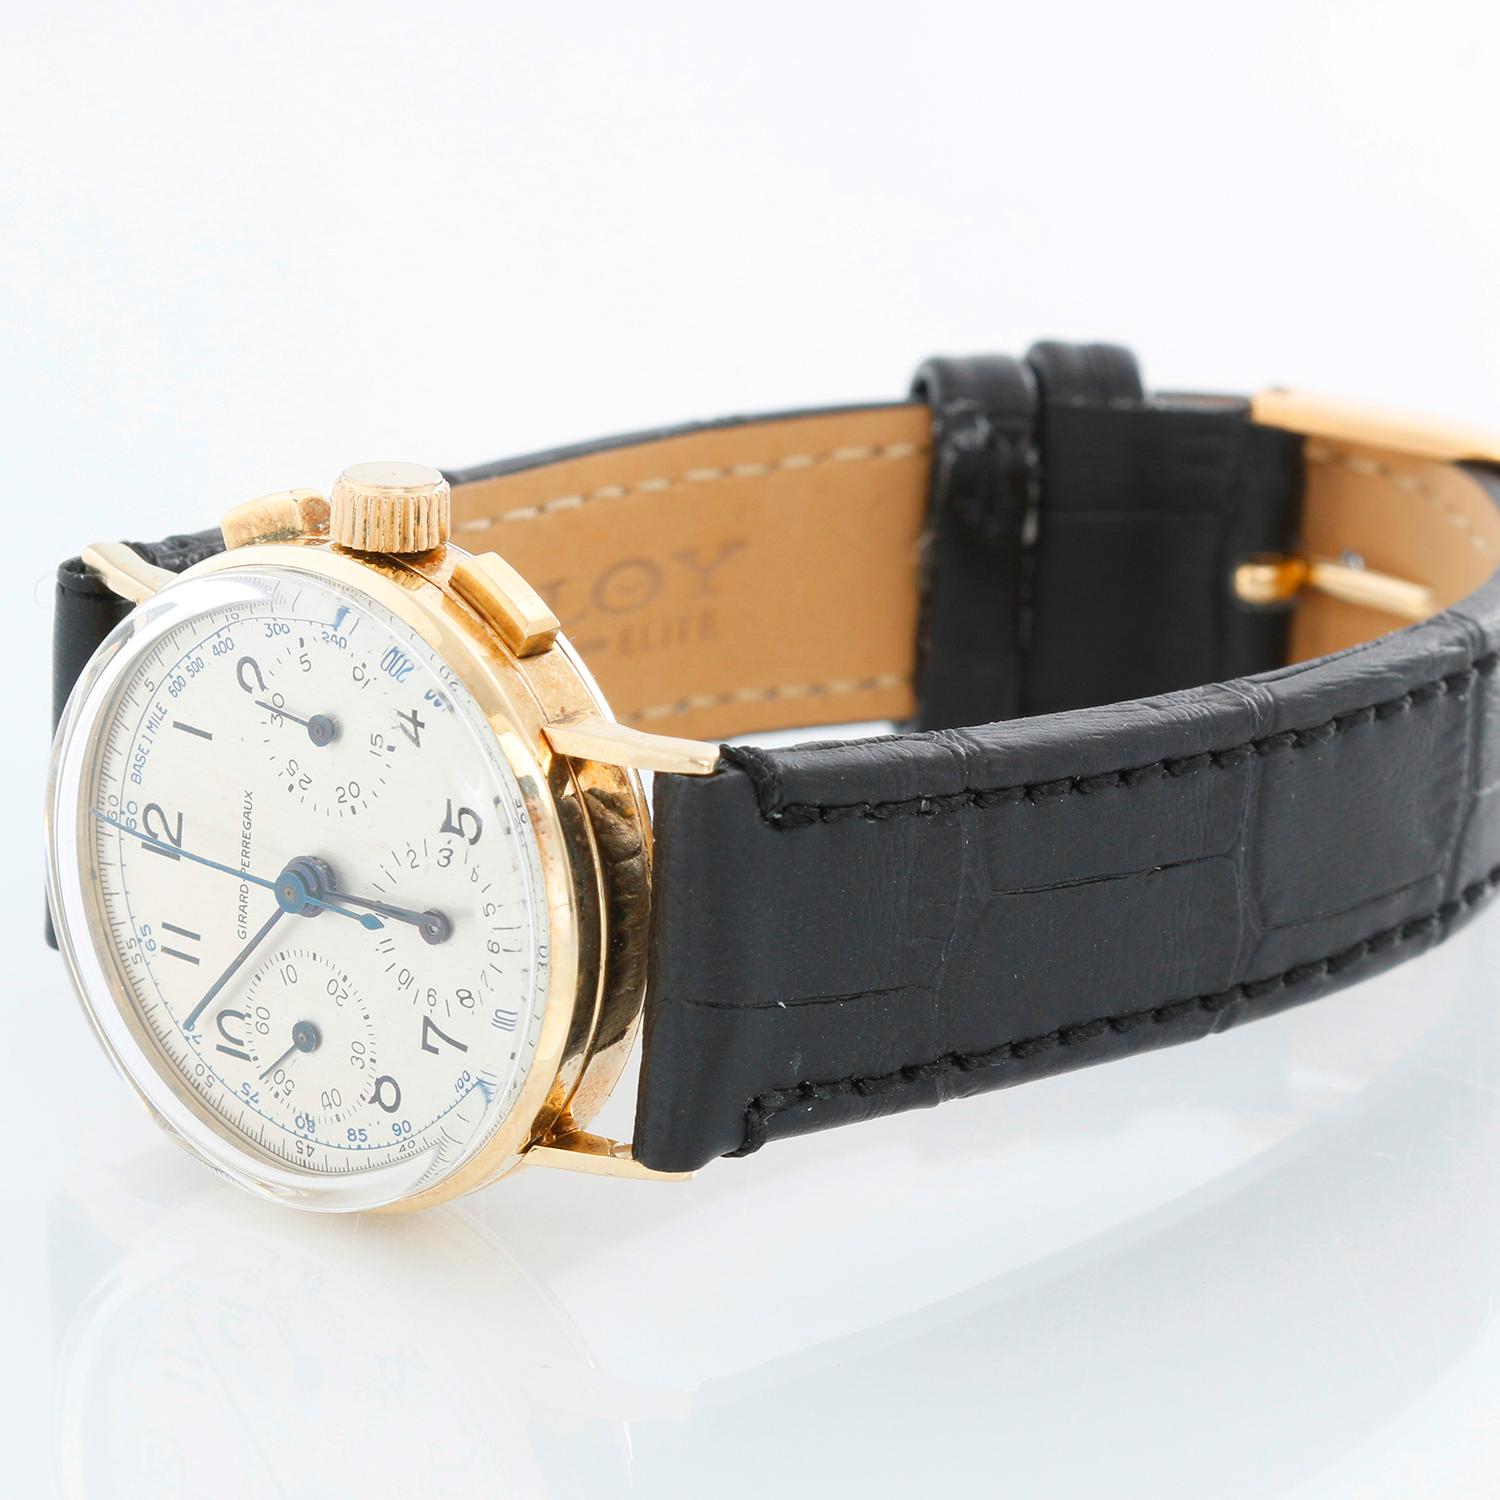 Vintage Girard Perregaux 14K Yellow Gold Boys Size Watch - Manual; Chronograph. 14K Yellow Gold (30  mm). Silver dial with Arabic numerals and subdials at 3 , 6, 9 o'clock. Black strap with tang buckle. Pre-owned with custom box. 
This watch will